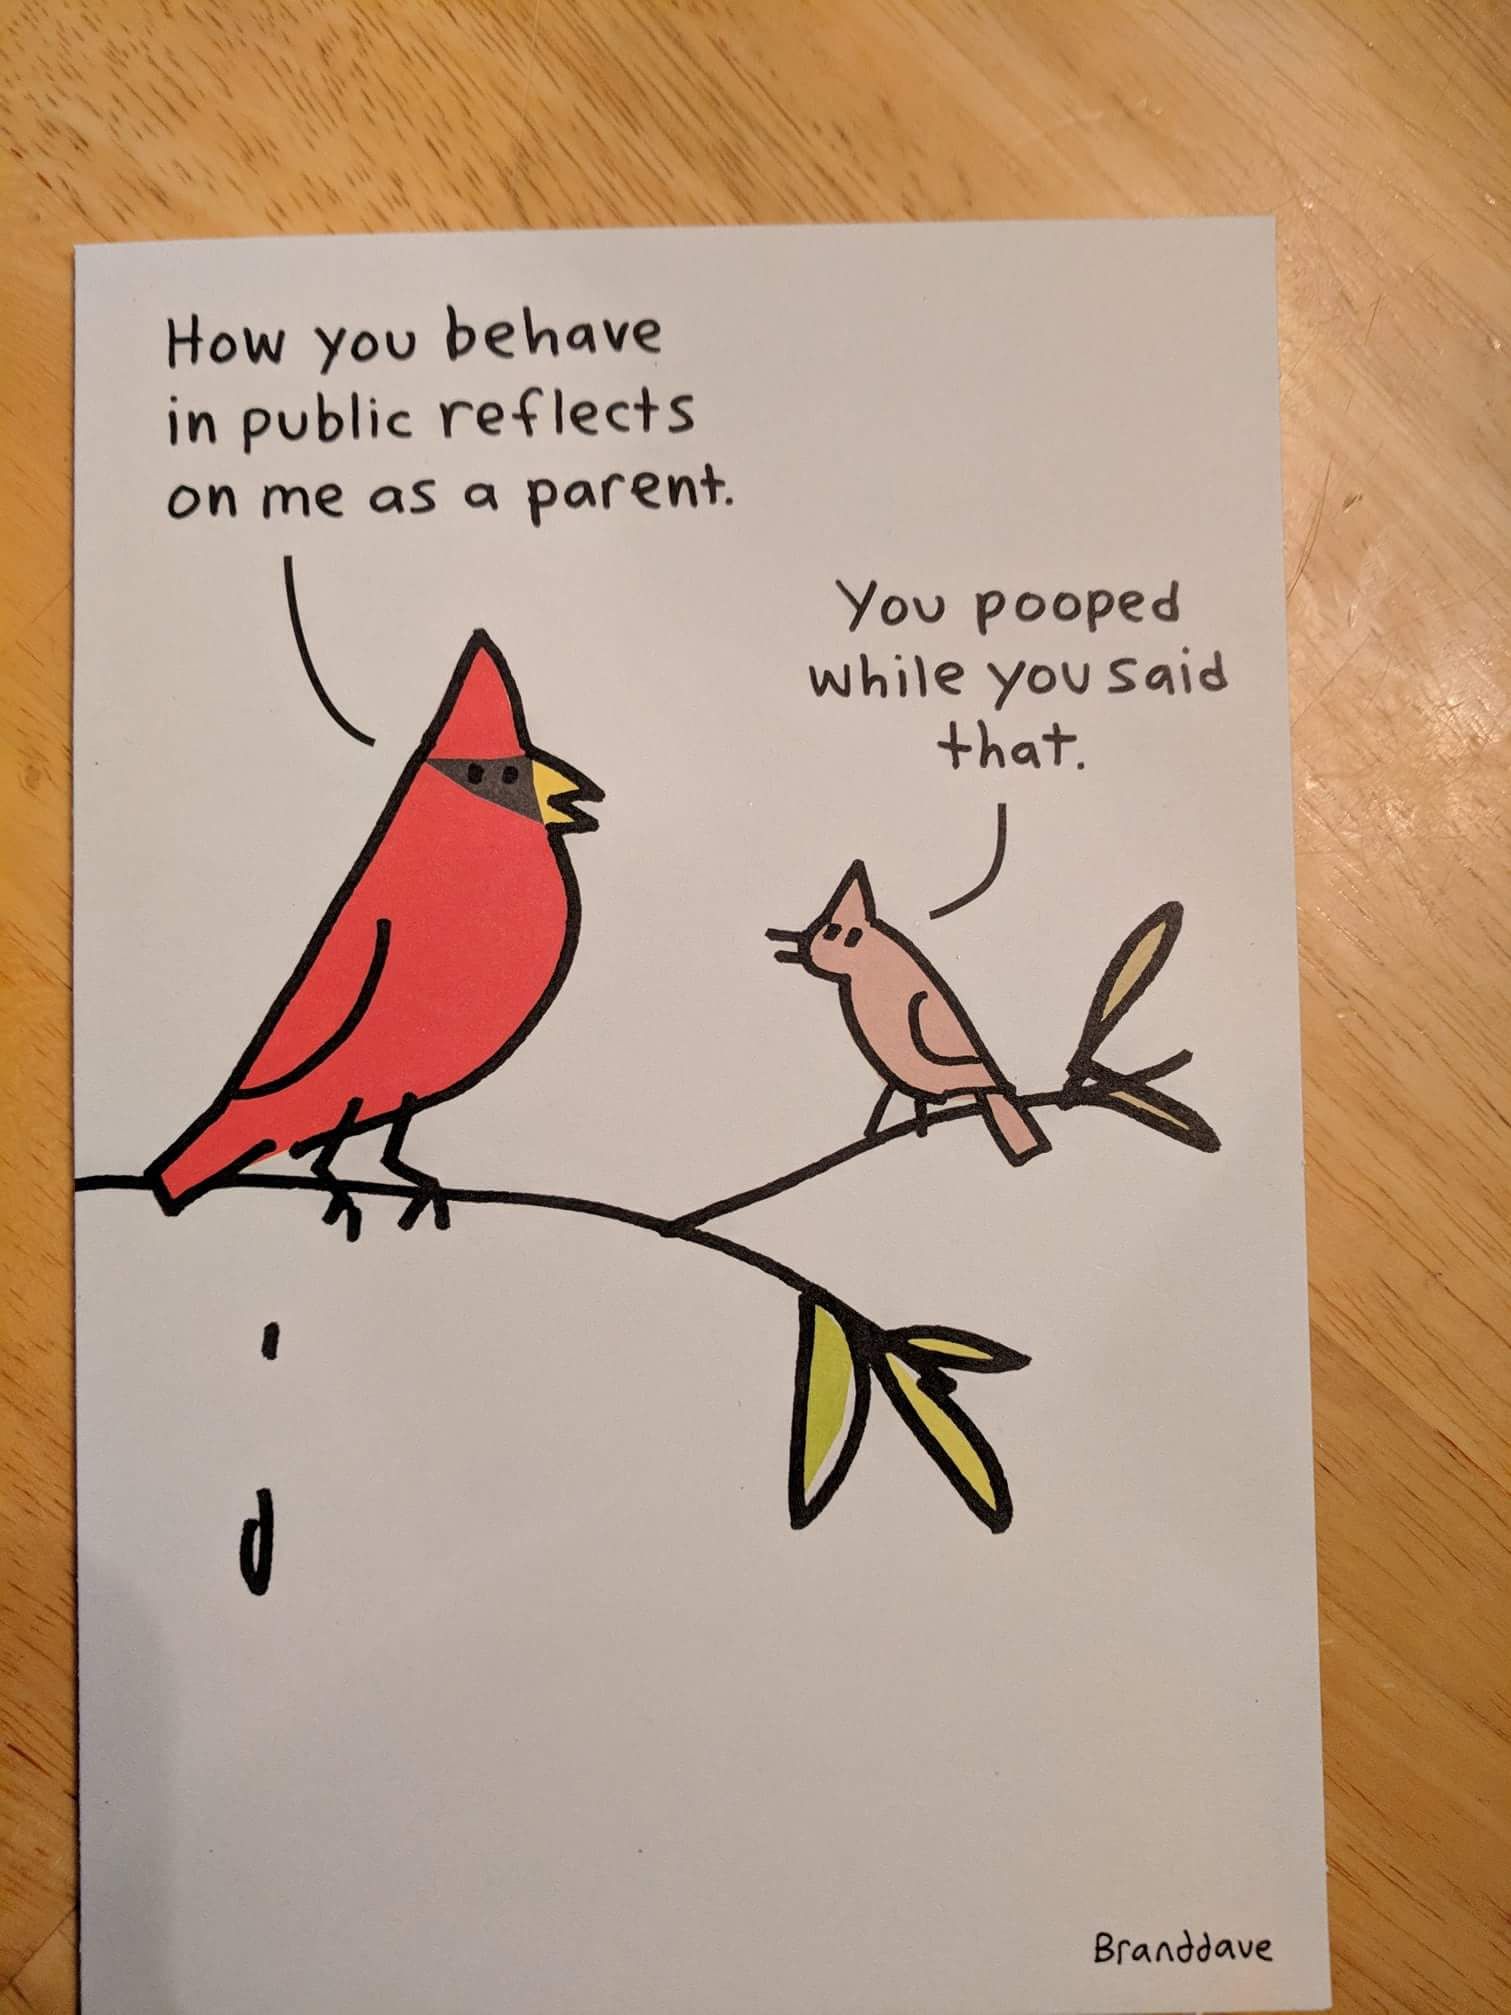 As a parent, the best birthday card I've ever received. The toilet humor is strong in our house.